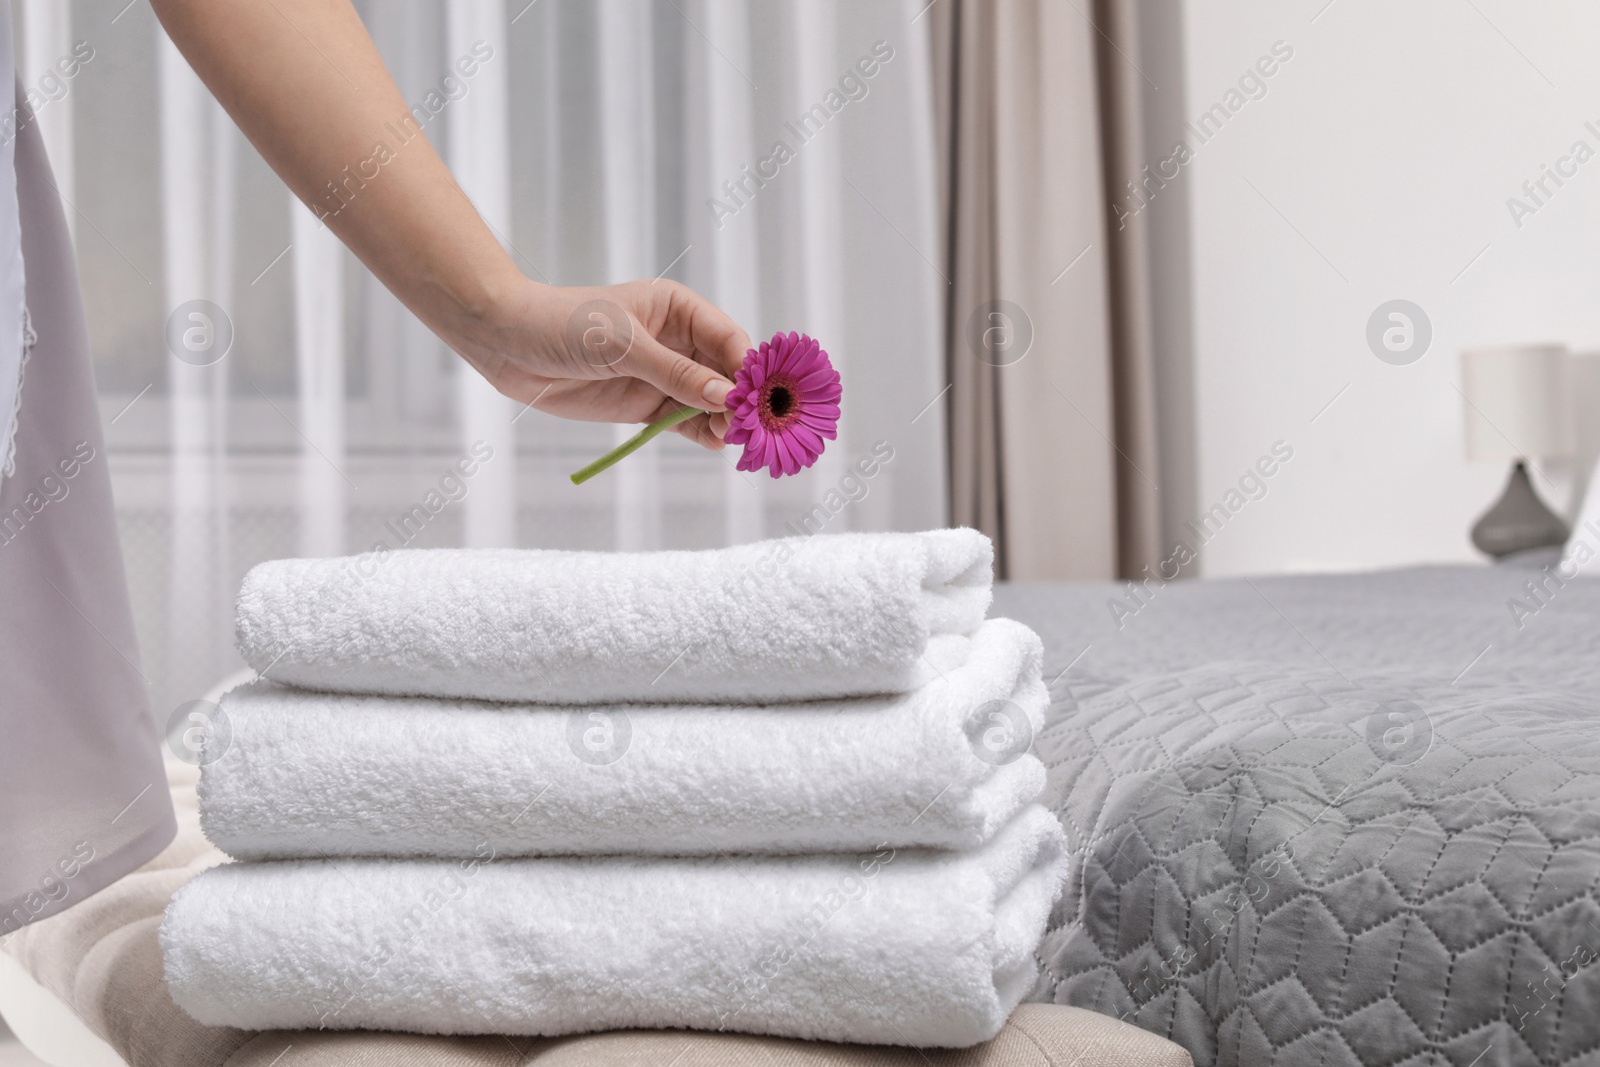 Photo of Maid putting flower on fresh towels in hotel room, closeup